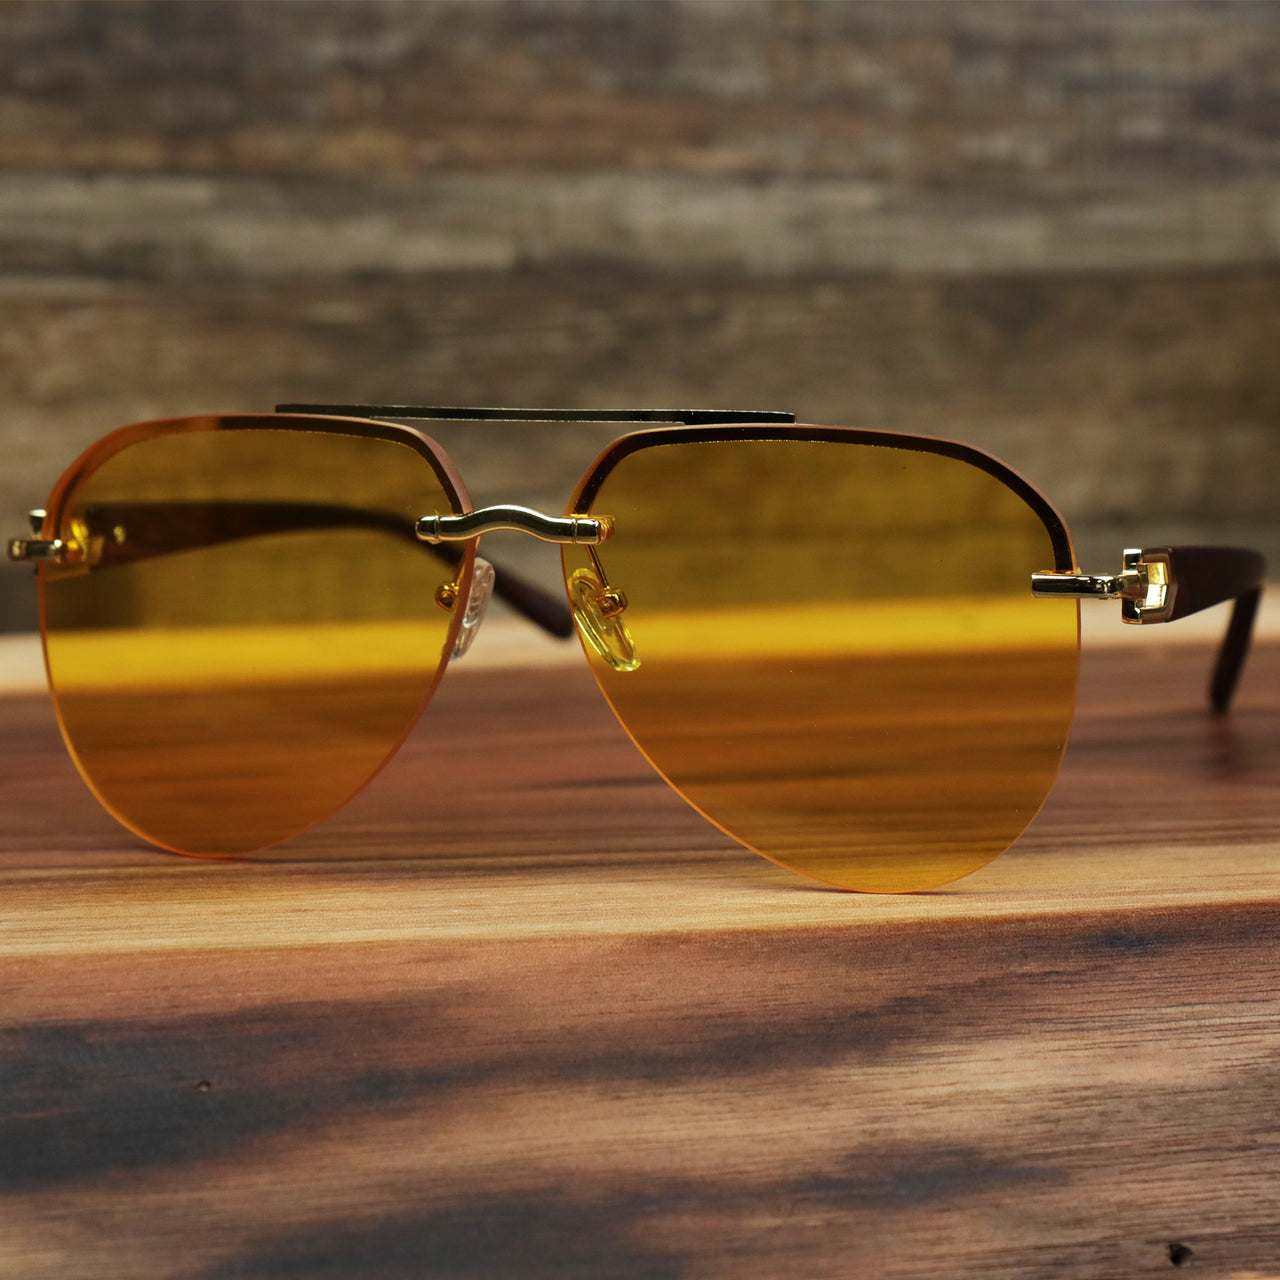 The Round Aviator Frames Yellow Lens Sunglasses with Gold Frame